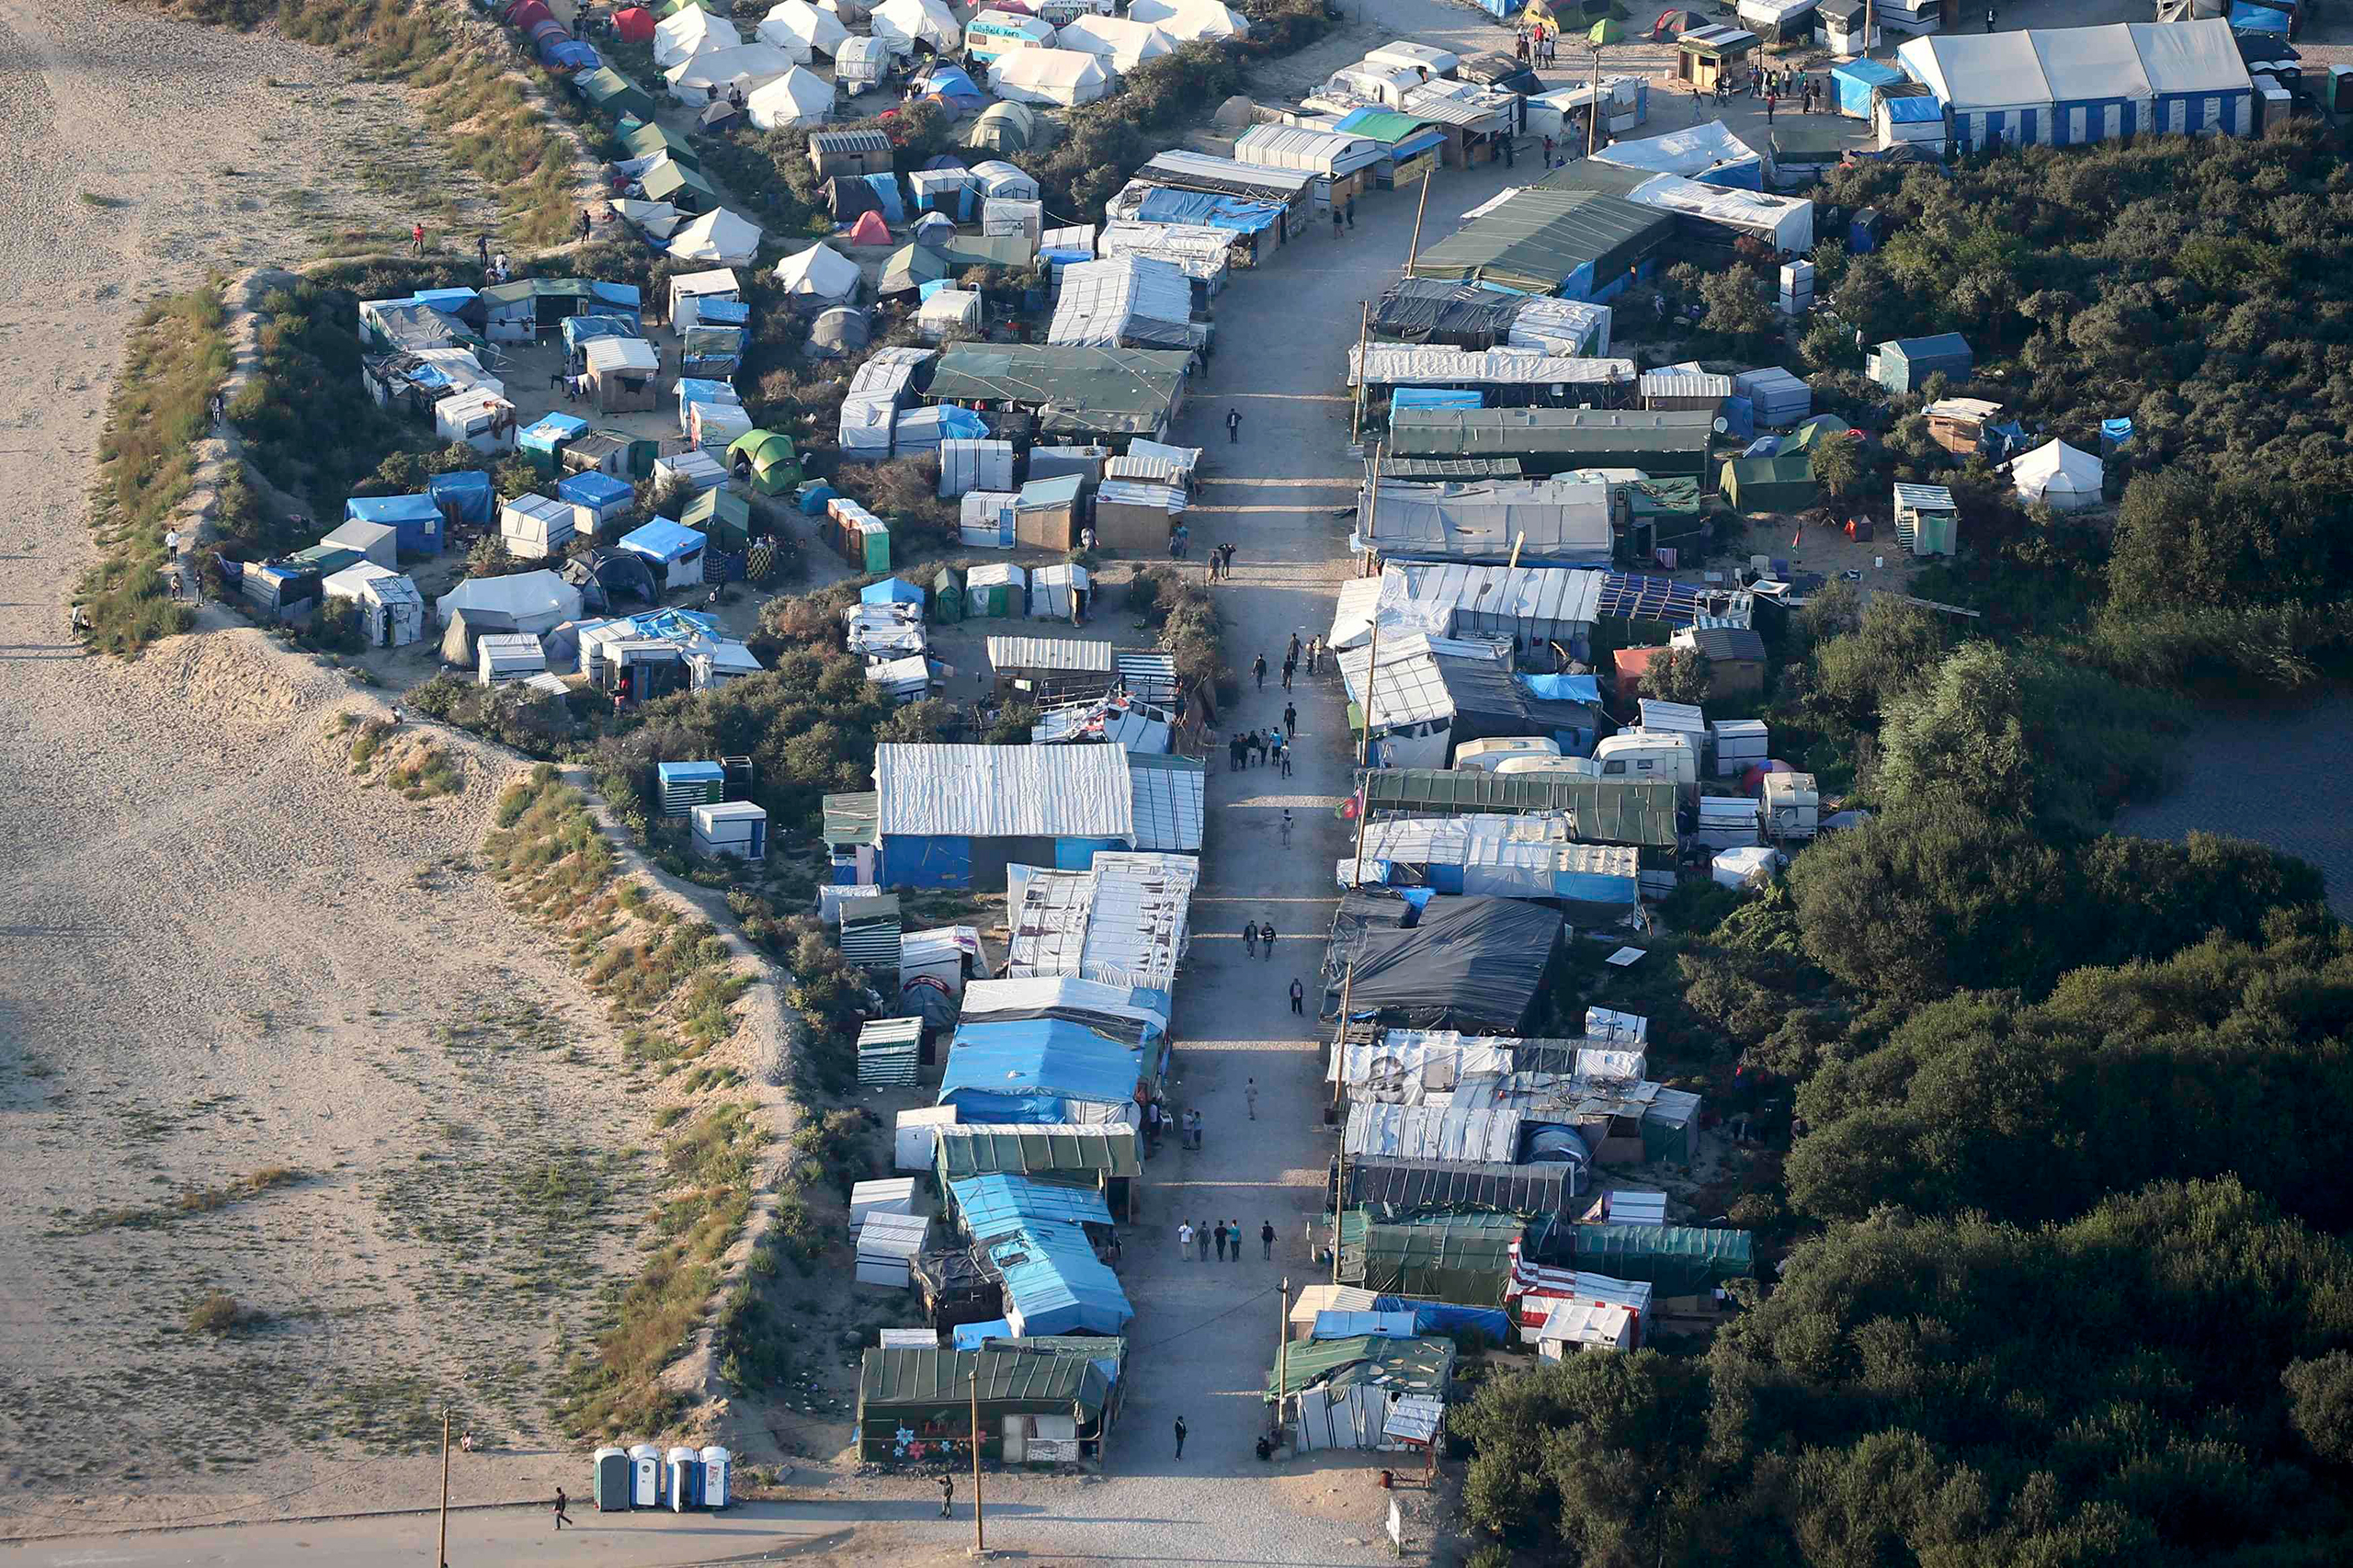 An aerial view shows makeshift shelters and tents where migrants live in what is known as "the Jungle," a sprawling camp in Calais, France, on Sept. 7, 2016. (Charles Platiau—Reuters)